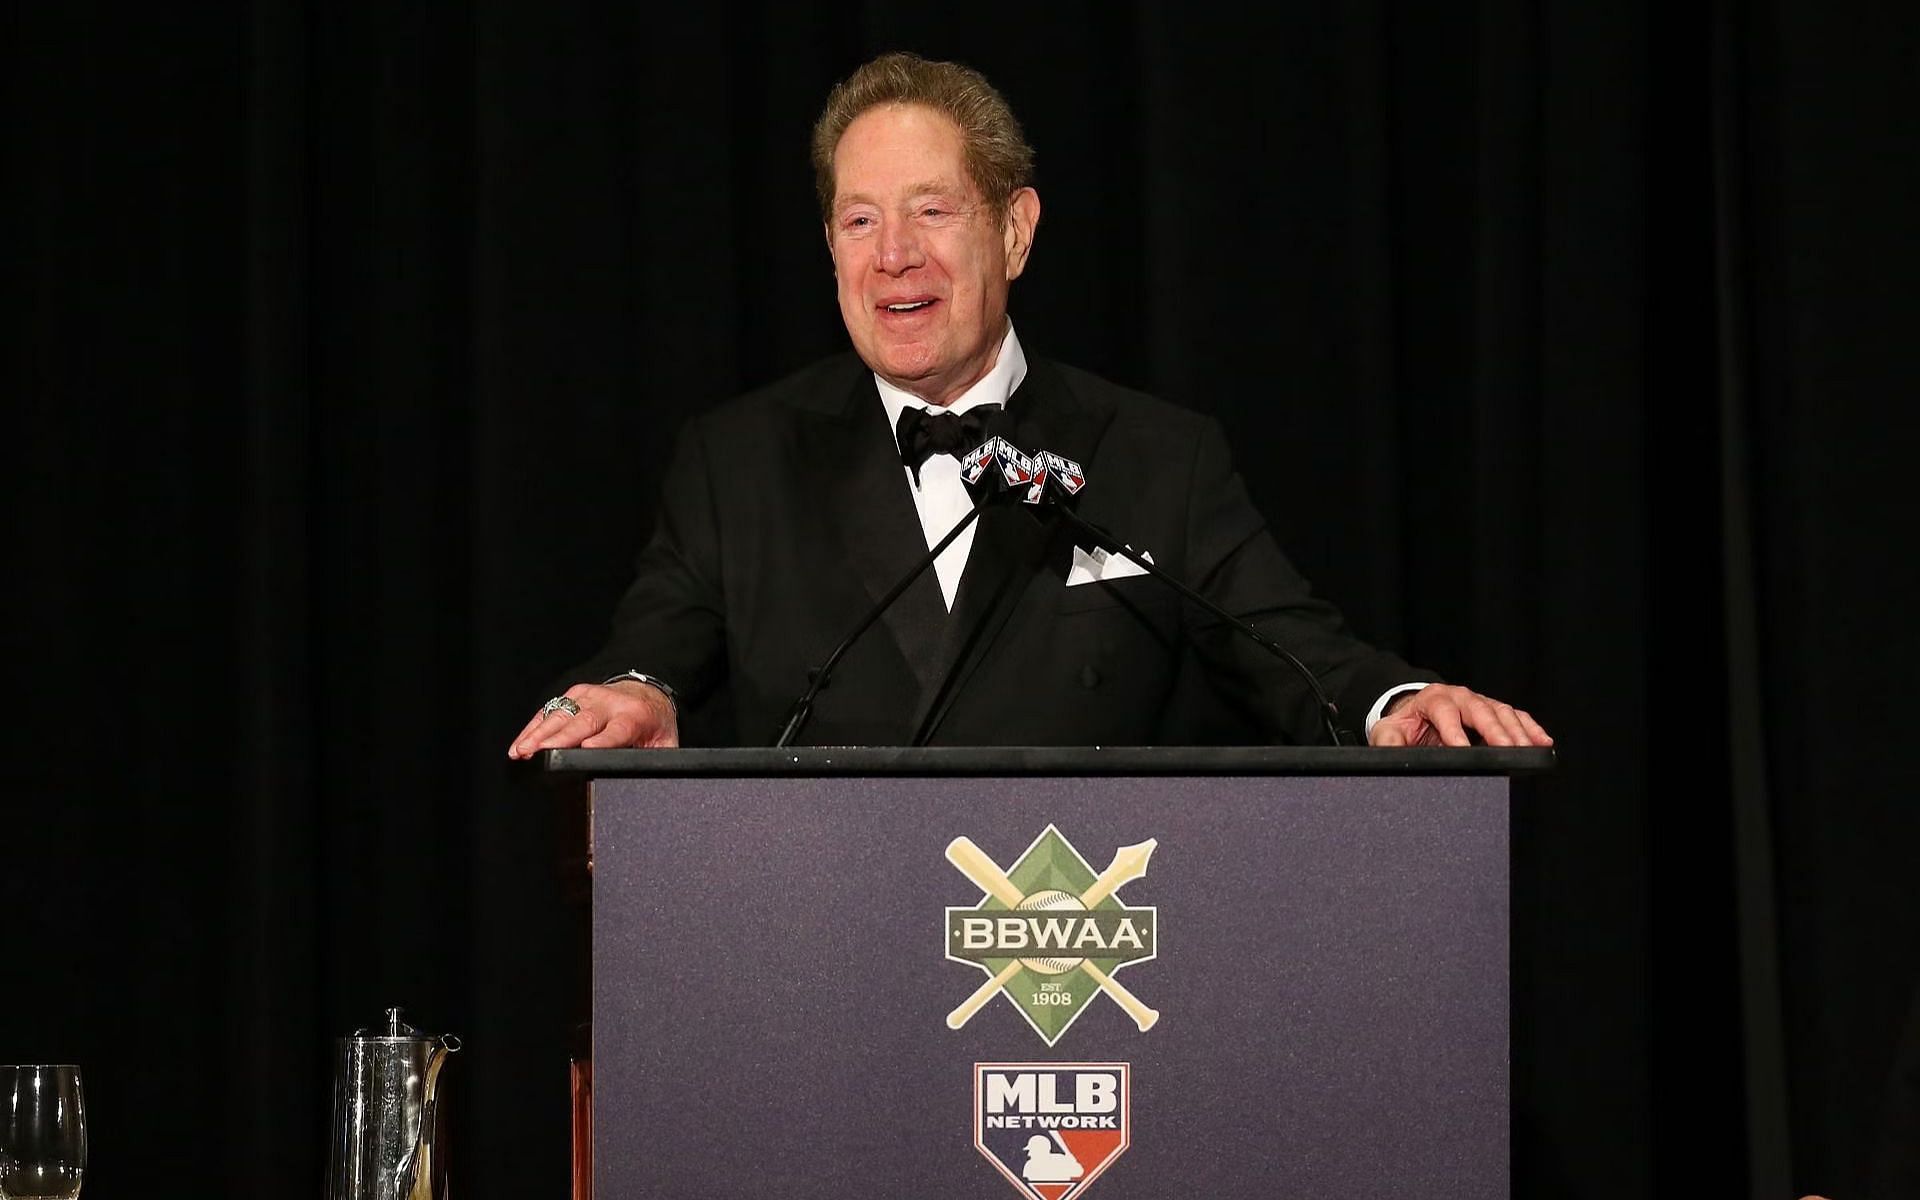 John Sterling announced his retirement from sportscasting [Image via Getty]